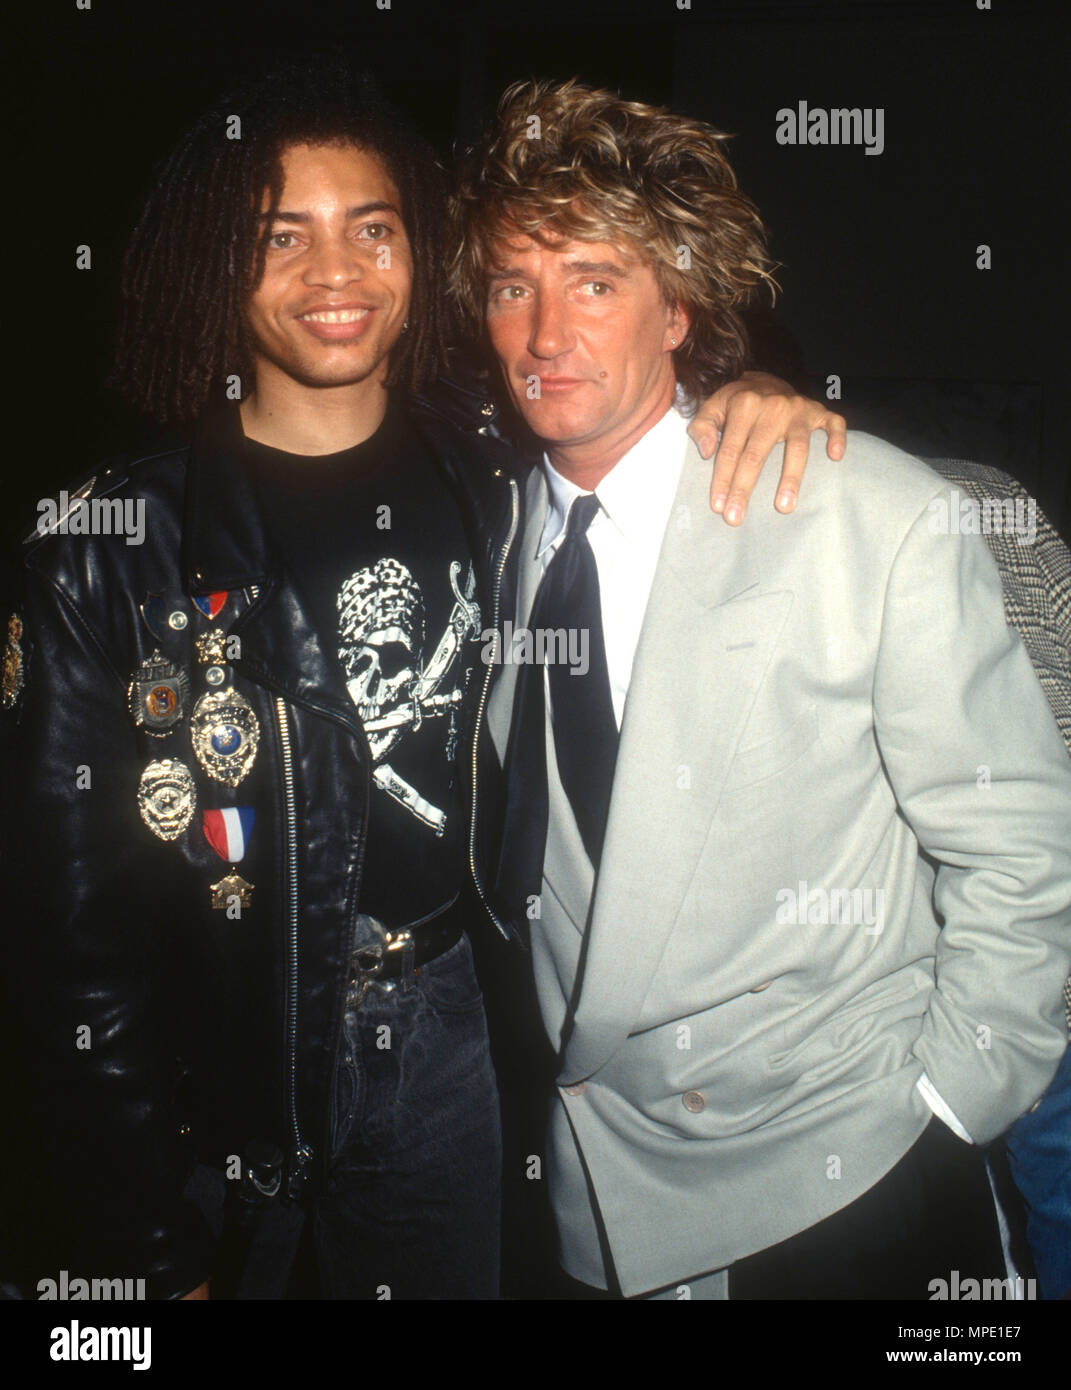 Santa Monica Ca January 31 L R Singers Terence Trent D Arby And Rod Stewart Attend Pollack Media Group S Eighth Annual Radio And Music Conference On January 31 1991 At The Museum Of